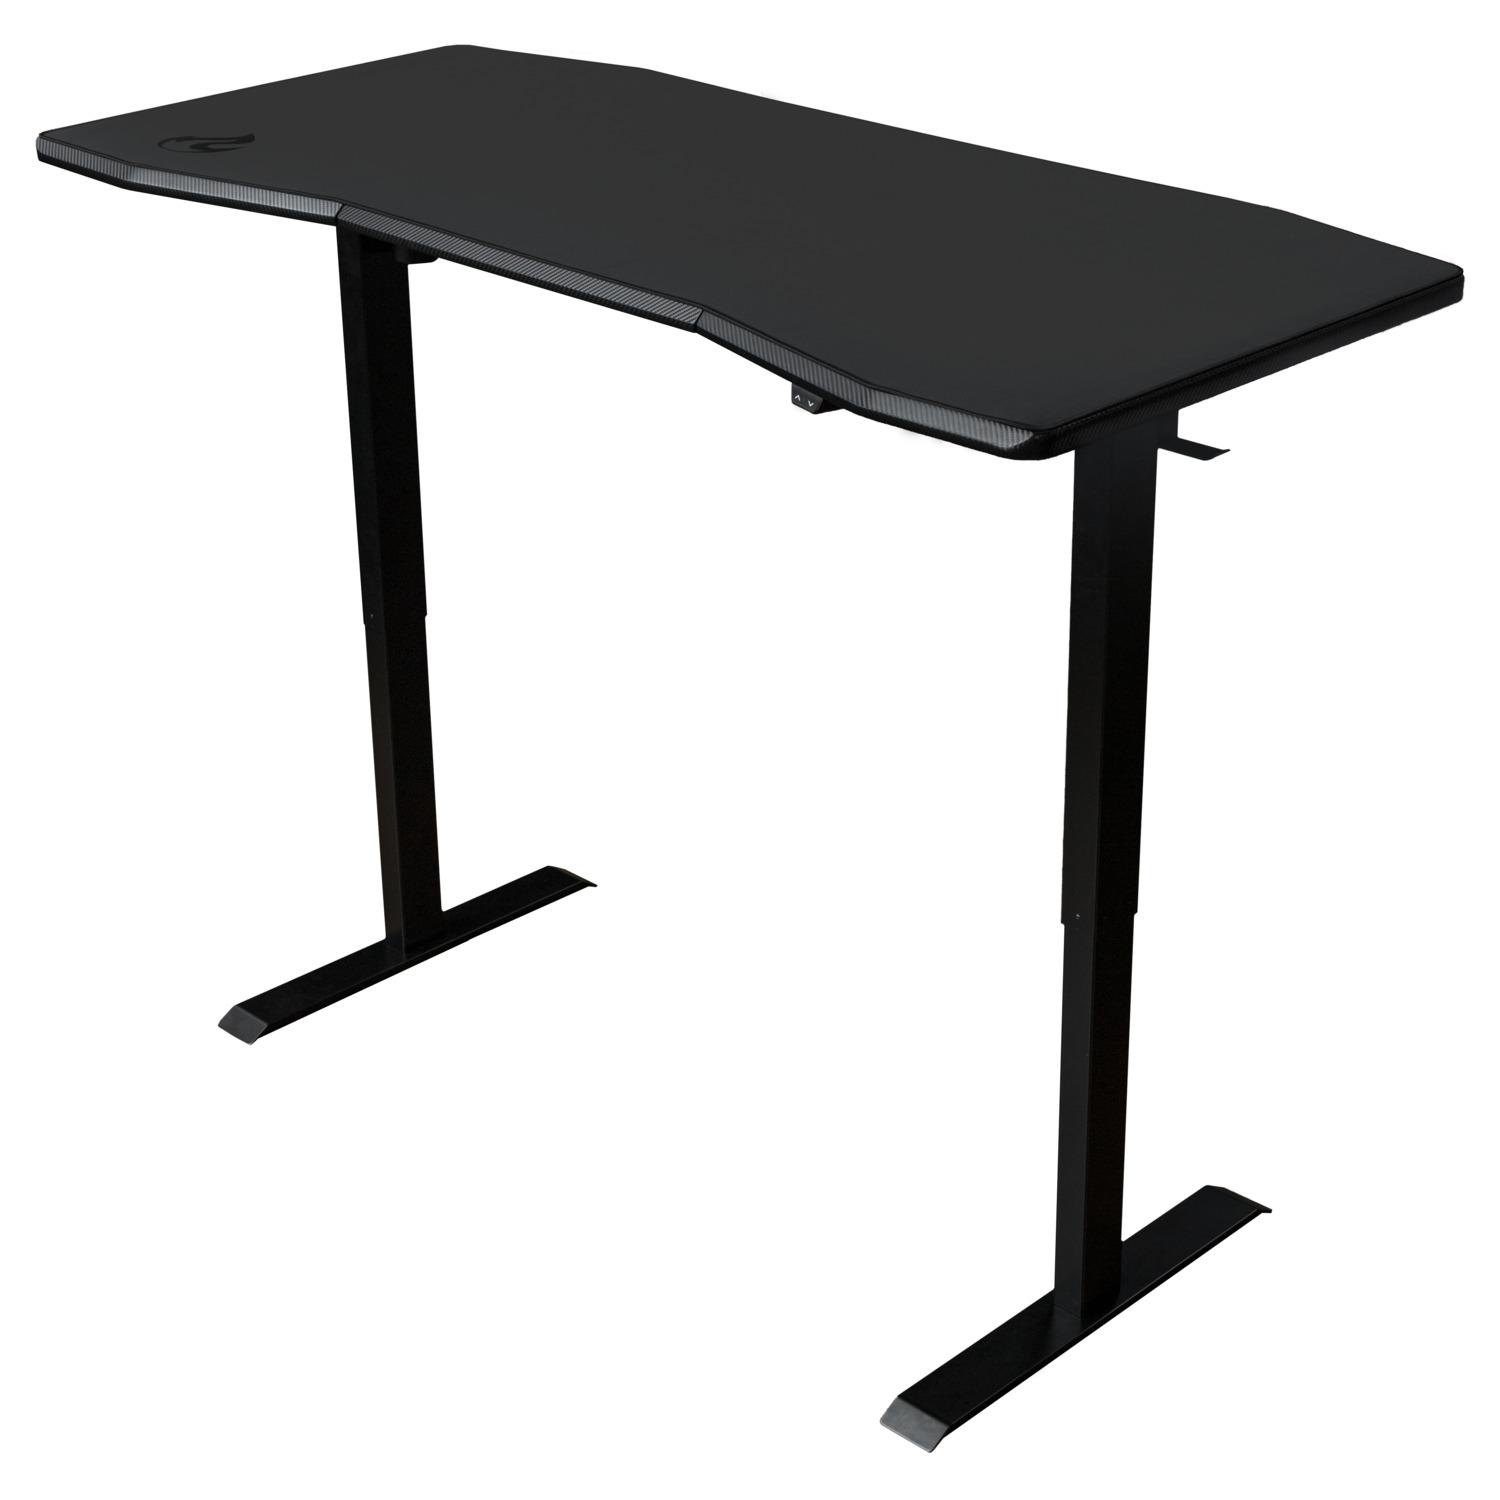 Nitro Concepts - Gaming Desk D16E Carbon Black - electrically adjustable height